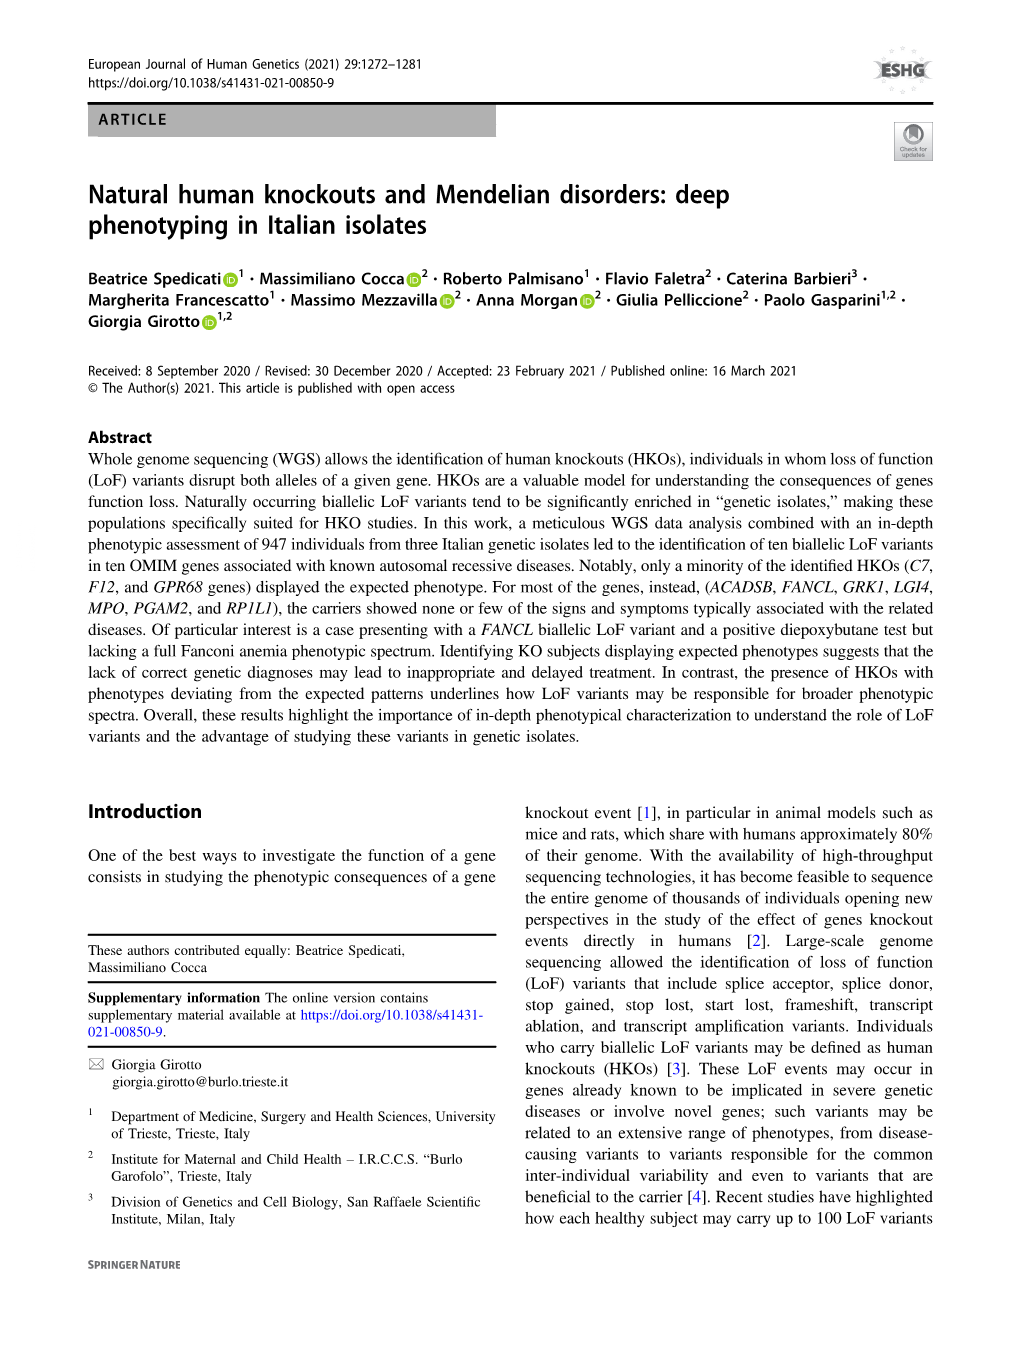 Natural Human Knockouts and Mendelian Disorders: Deep Phenotyping in Italian Isolates